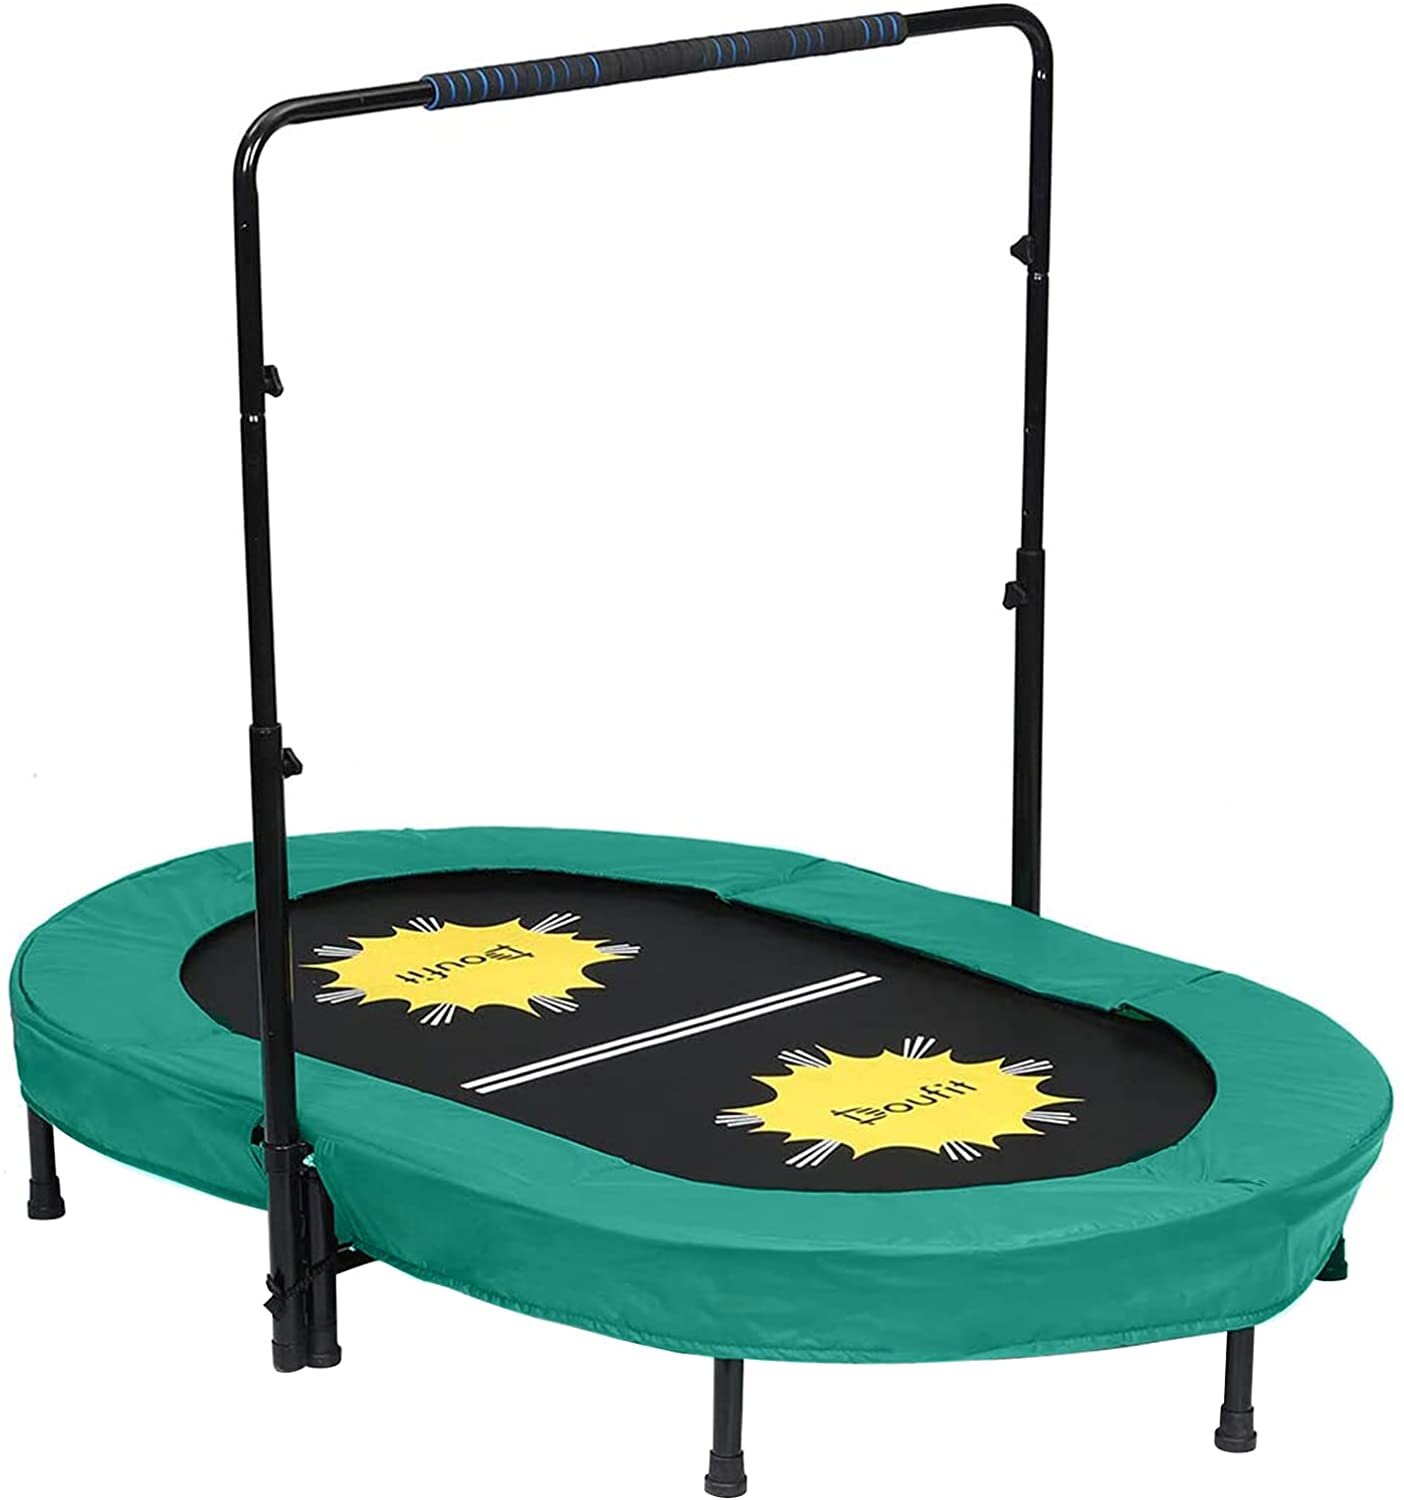 Doufit Indoor Fitness Trampoline Folding Rebounder Exercise Workout Outdoor Gym 